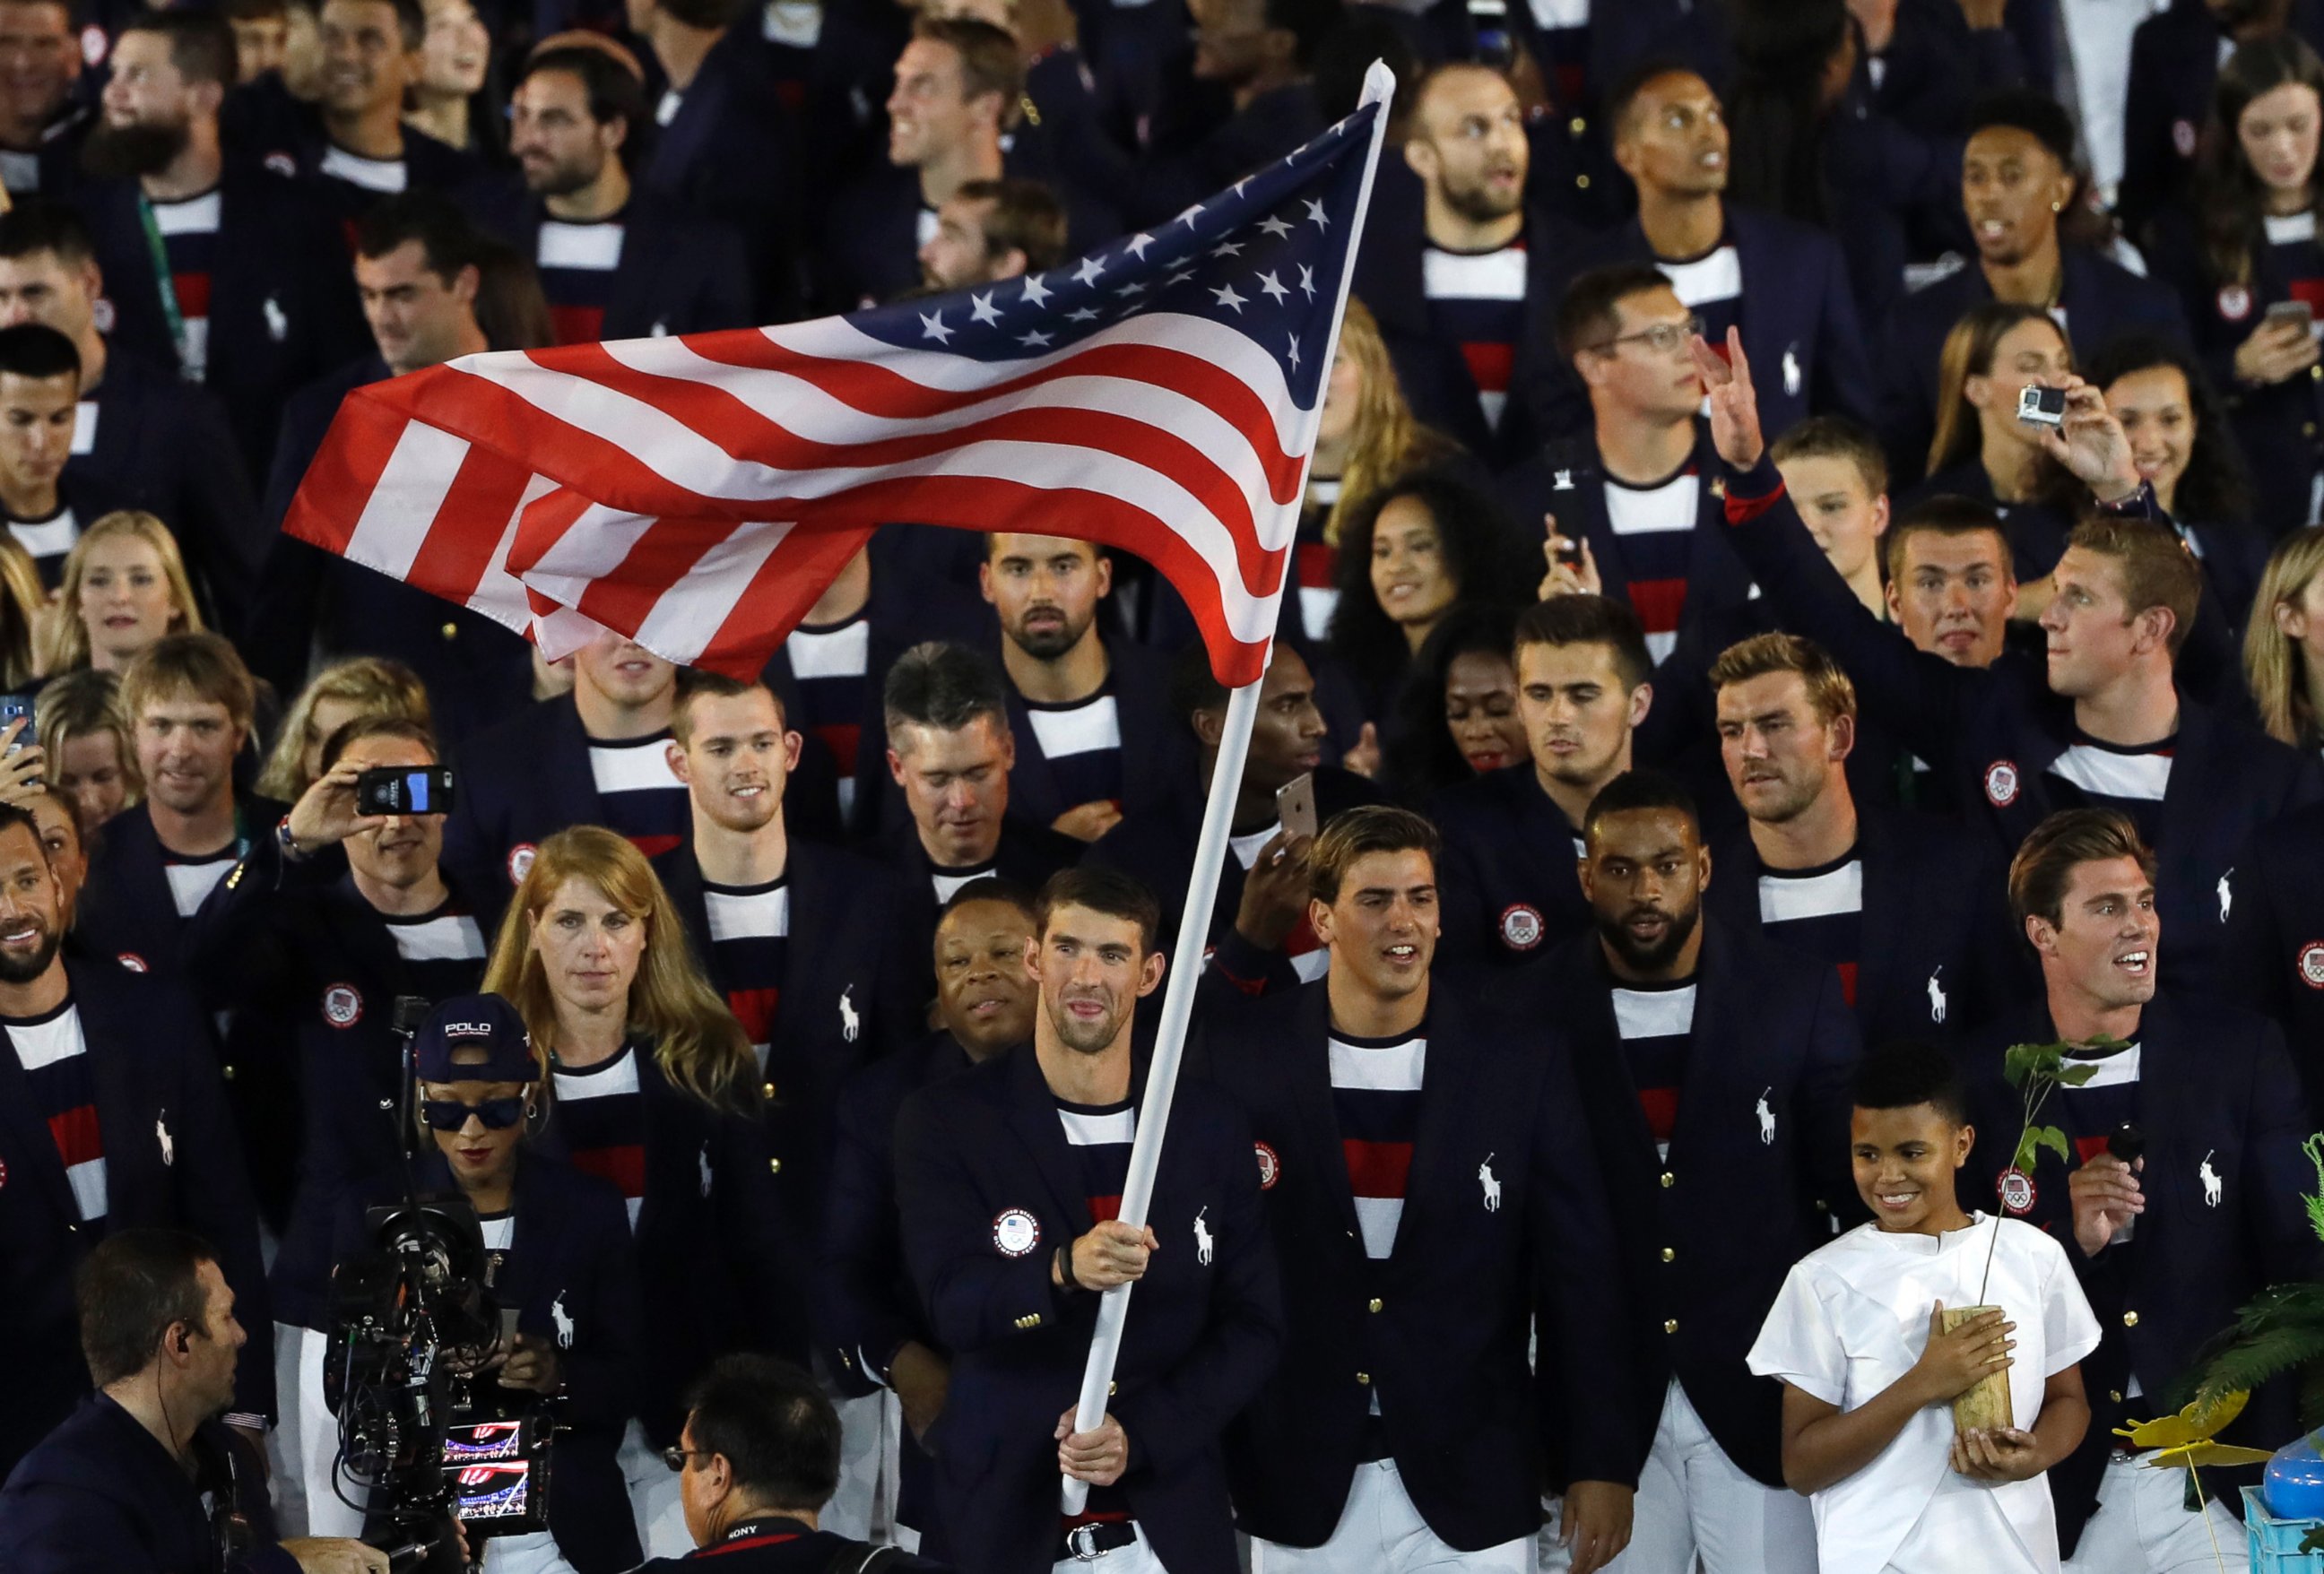 PHOTO: Michael Phelps carries the flag of the United States during the opening ceremony for the 2016 Summer Olympics in Rio de Janeiro, Brazil, Aug. 5, 